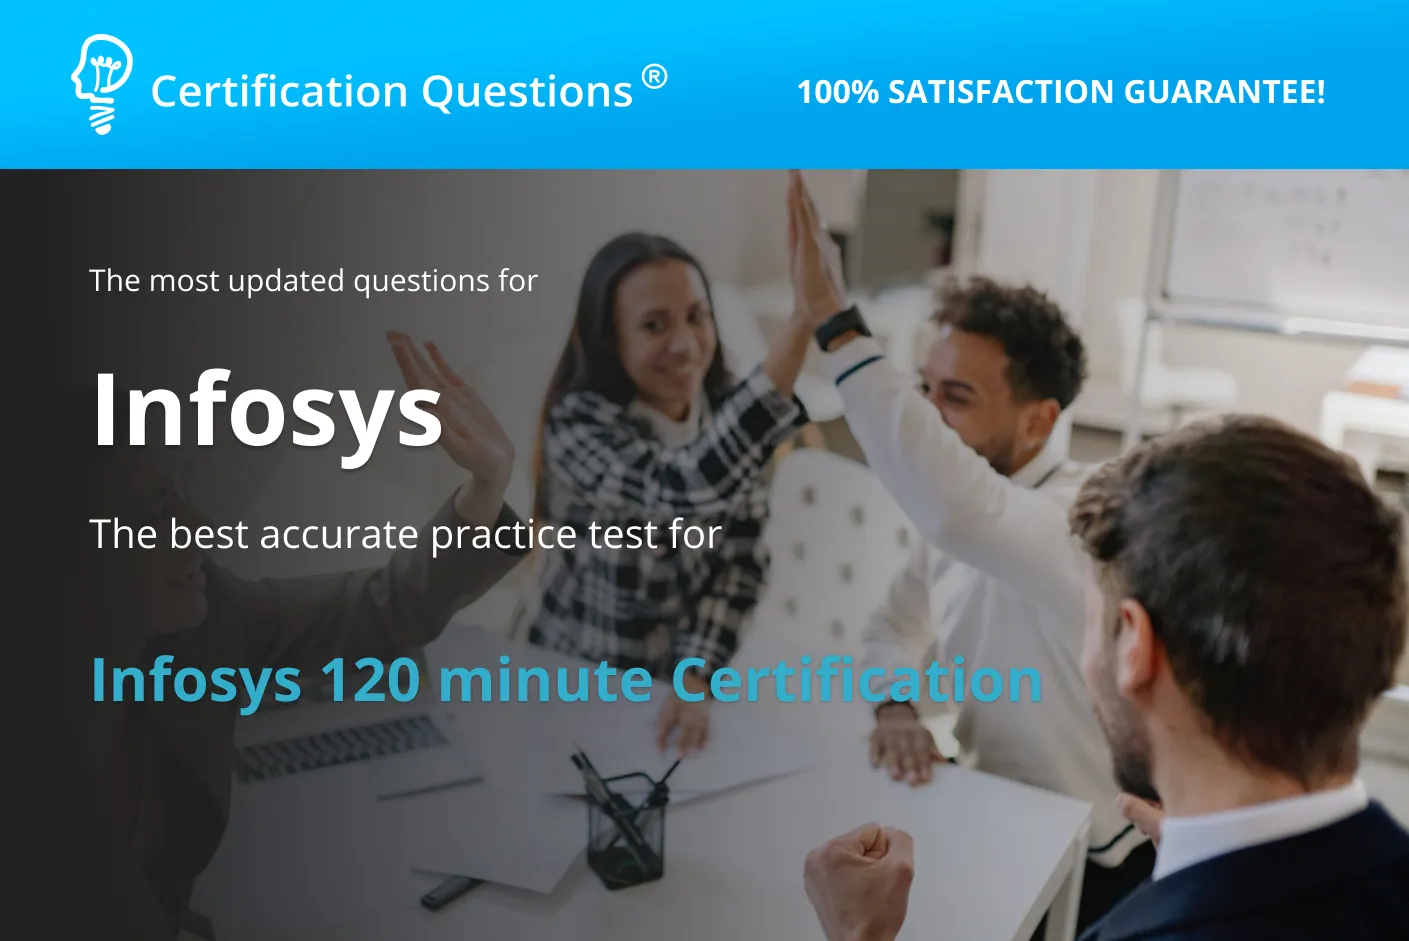 This image is related to Infosys 120 minute certification practice test